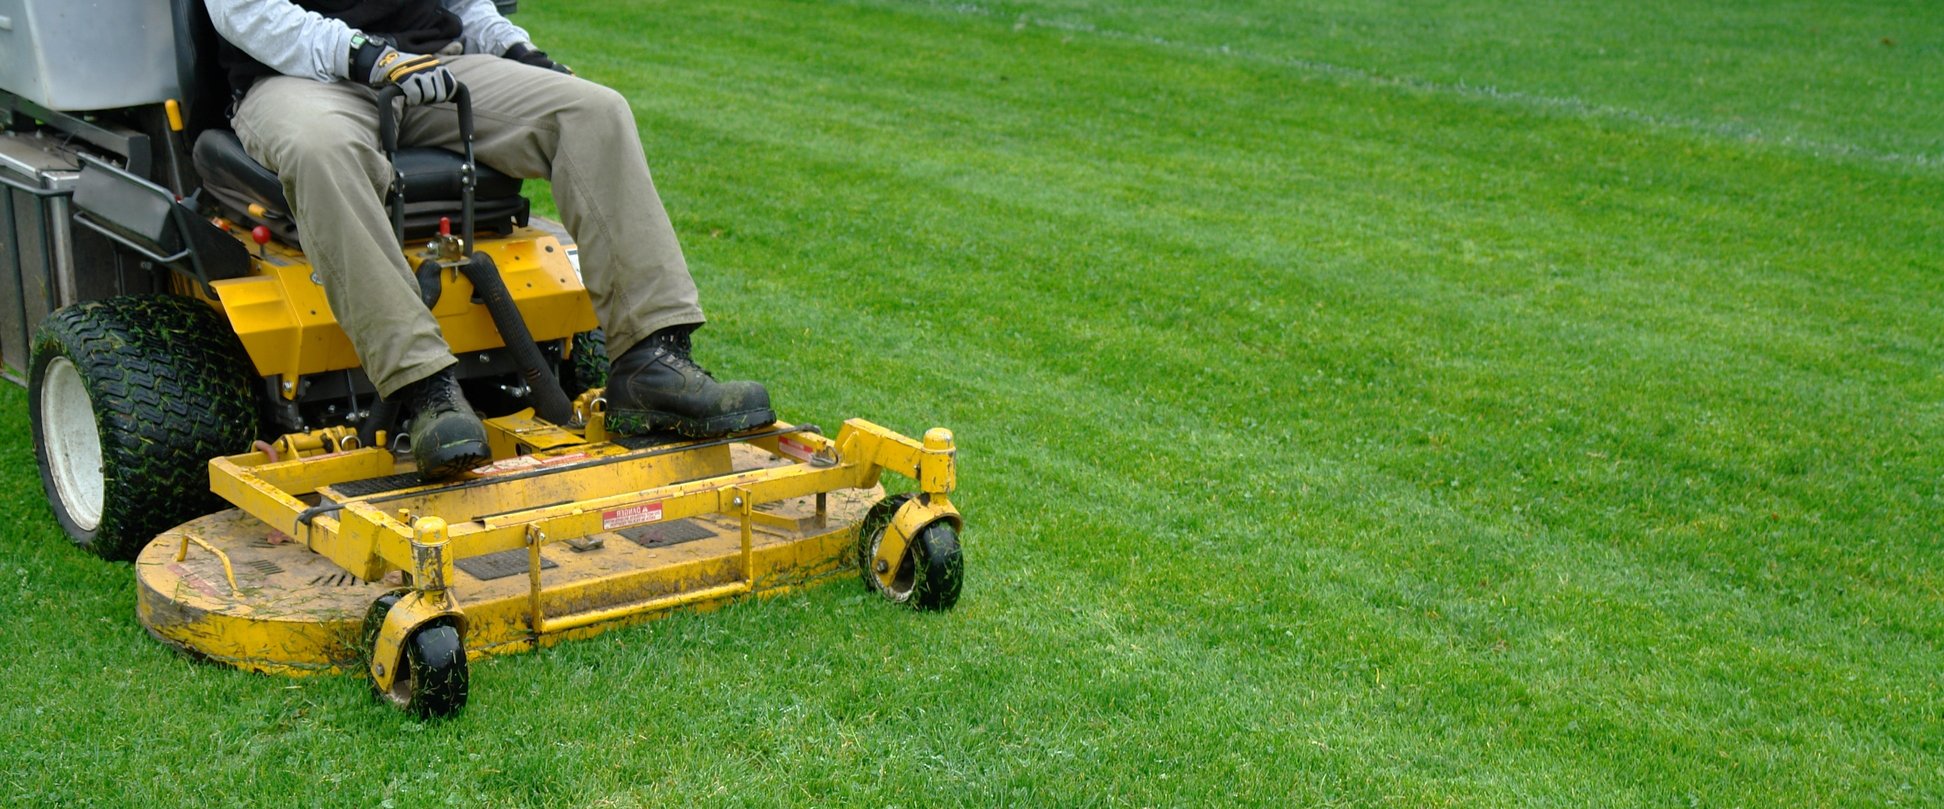 Myths About Lawn Care